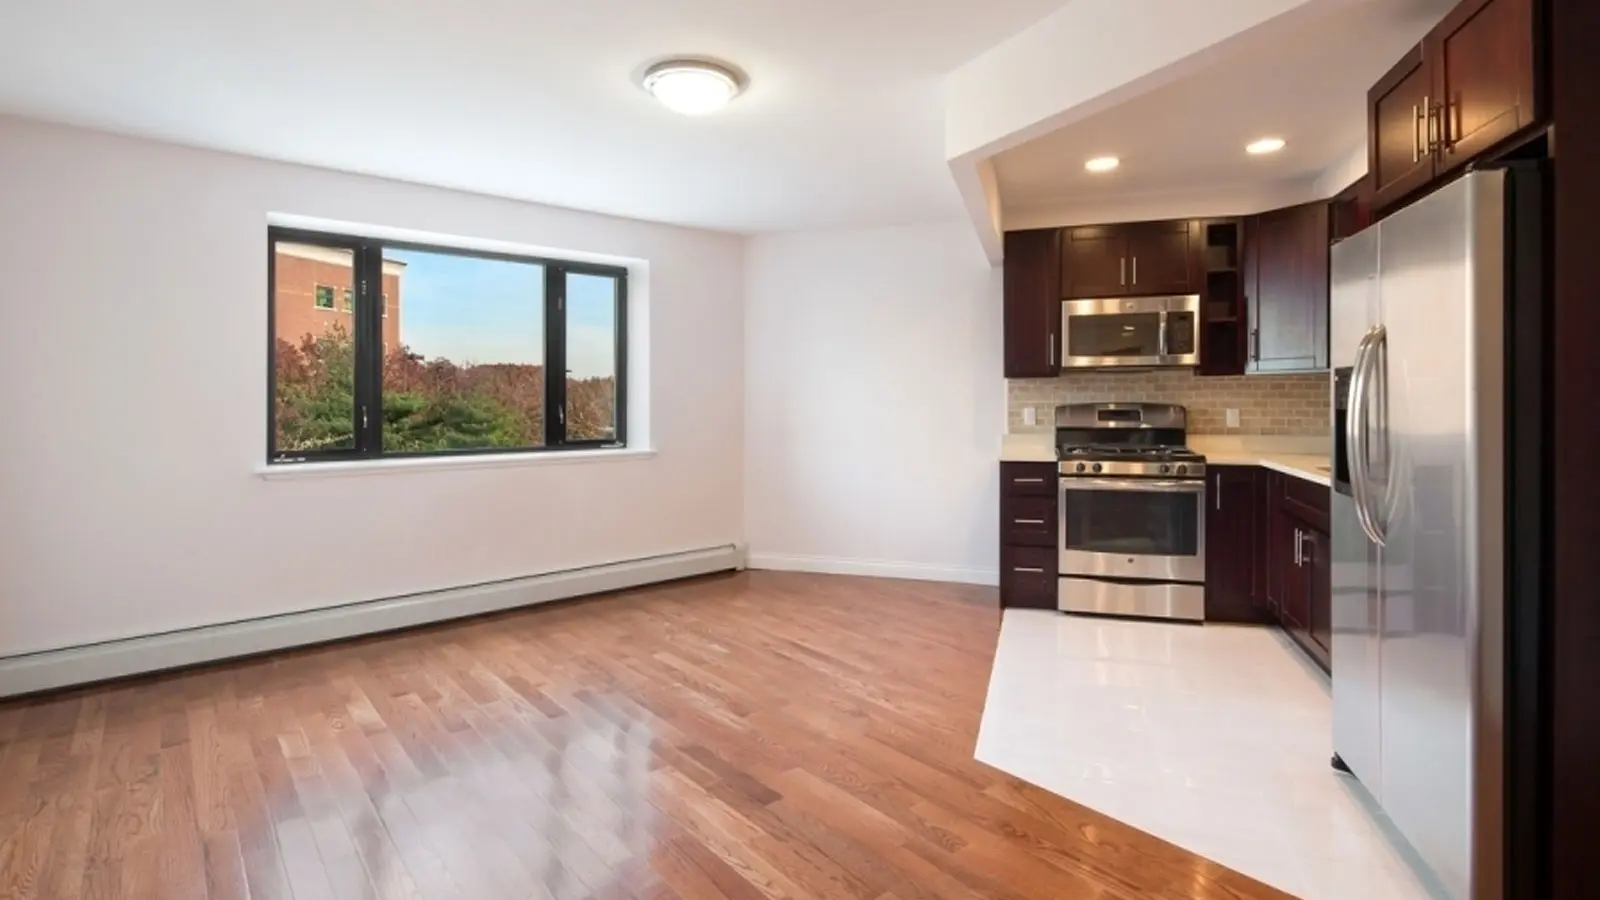 Edgecombe Parc, 456 West 167th Street